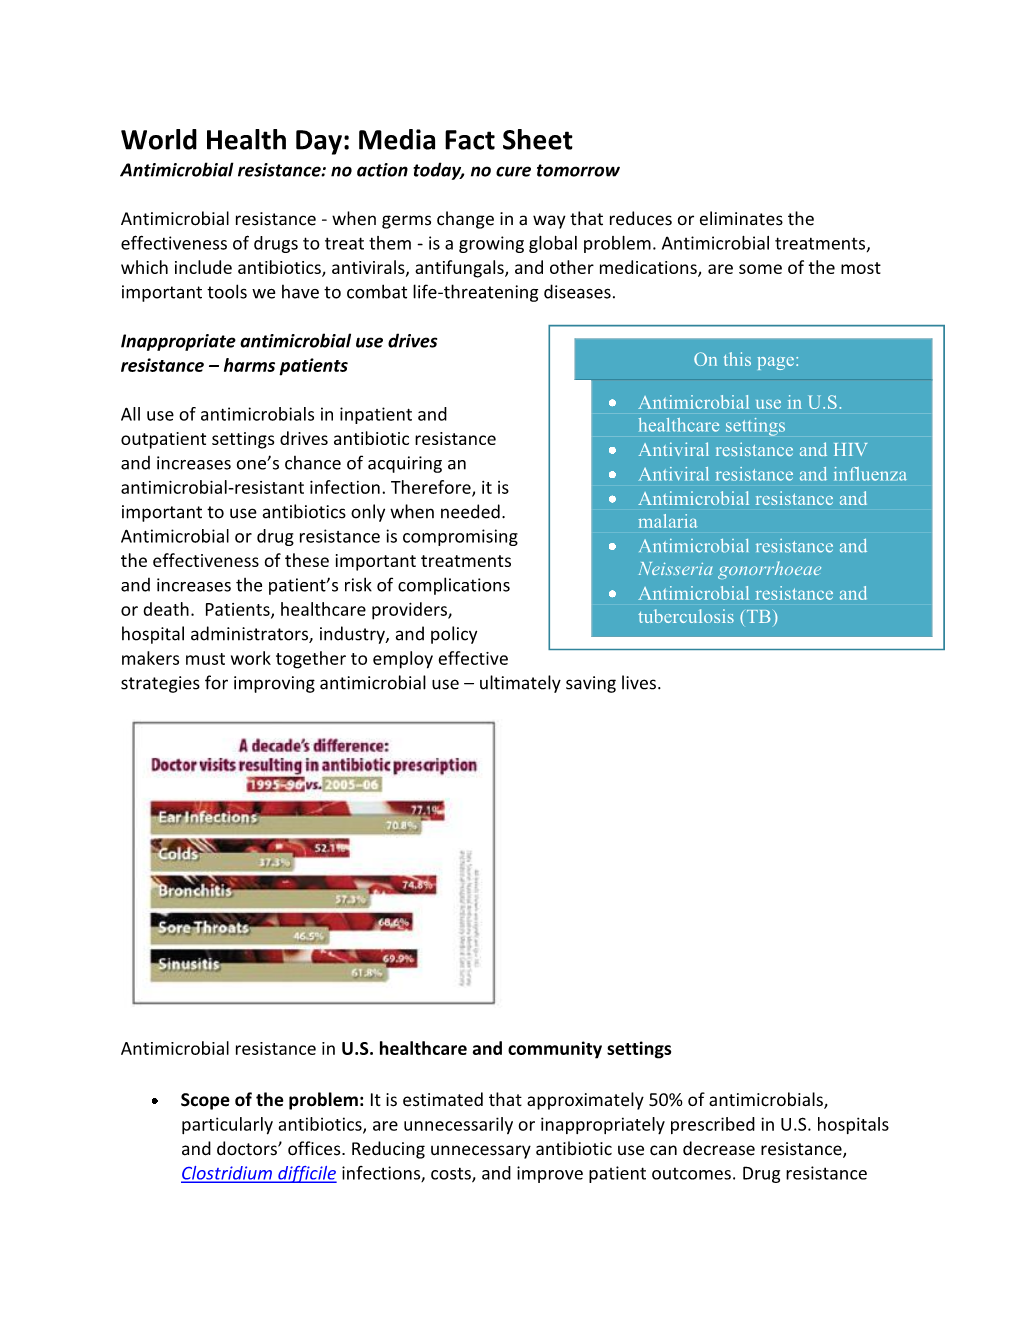 Media Fact Sheet Antimicrobial Resistance: No Action Today, No Cure Tomorrow